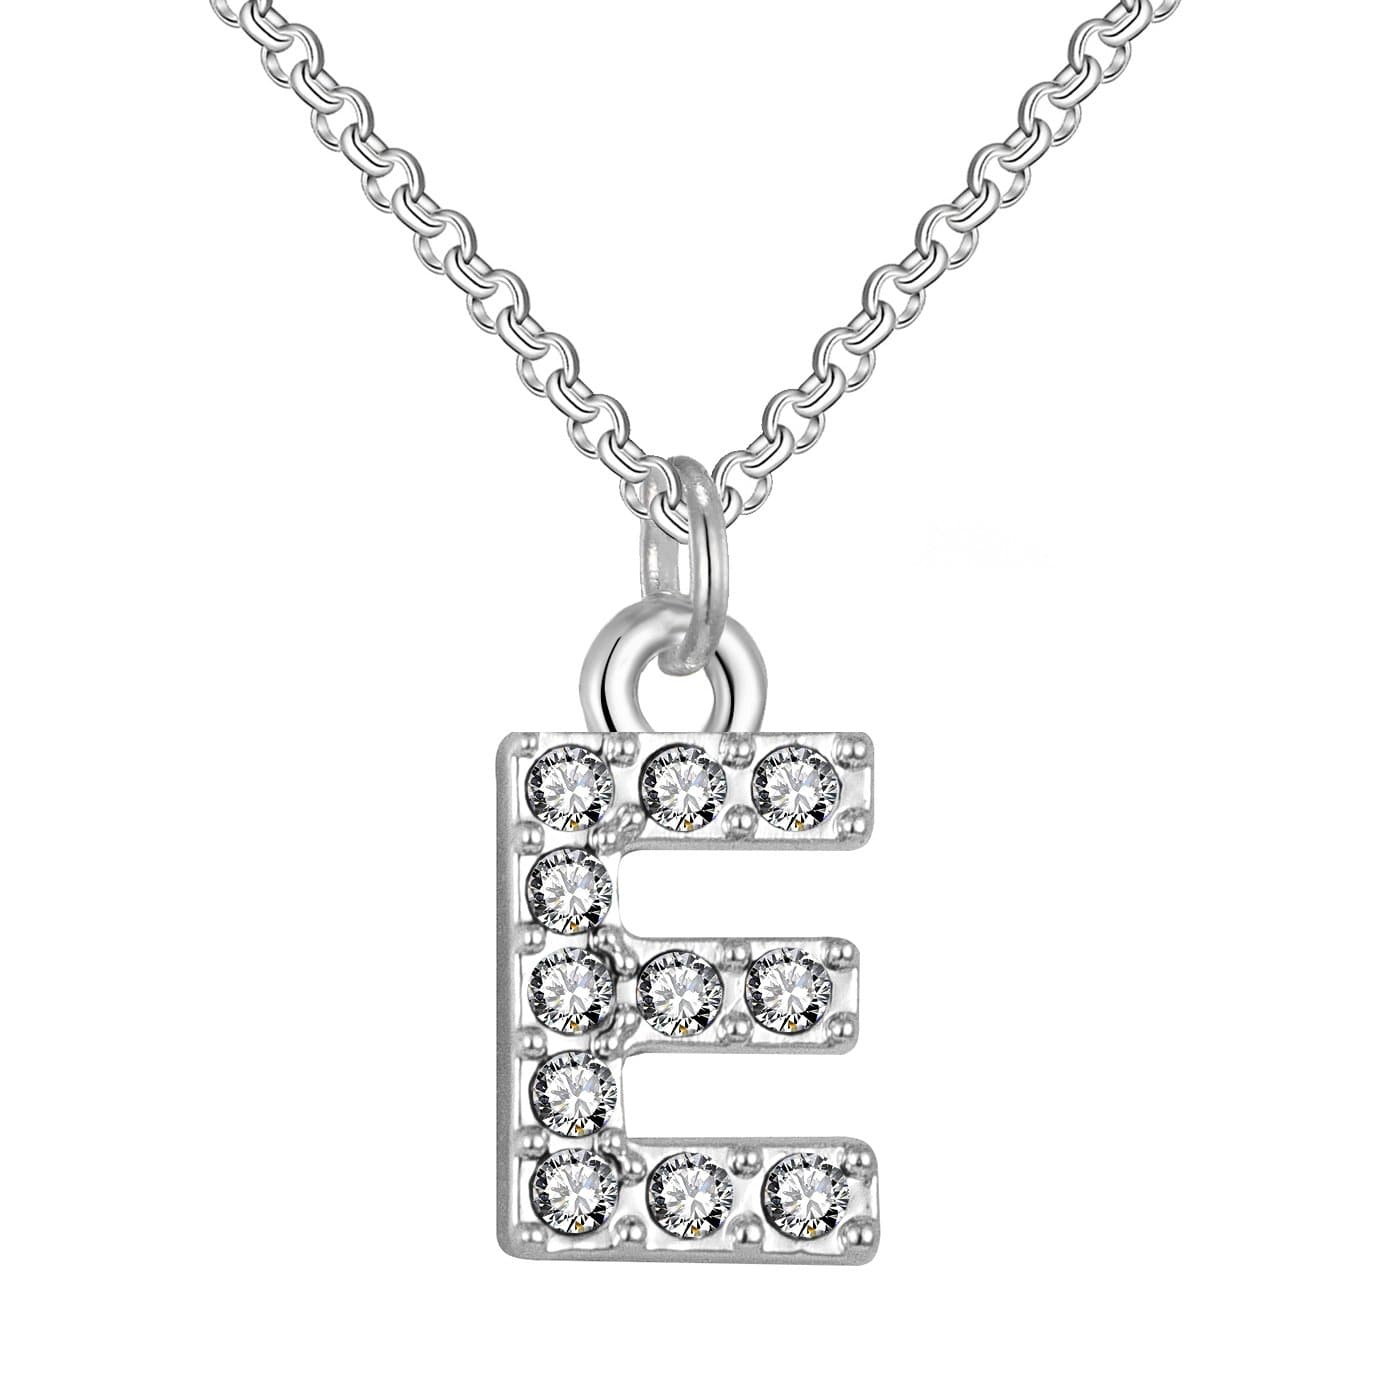 Pave Initial Necklace Letter E Created with Zircondia® Crystals by Philip Jones Jewellery